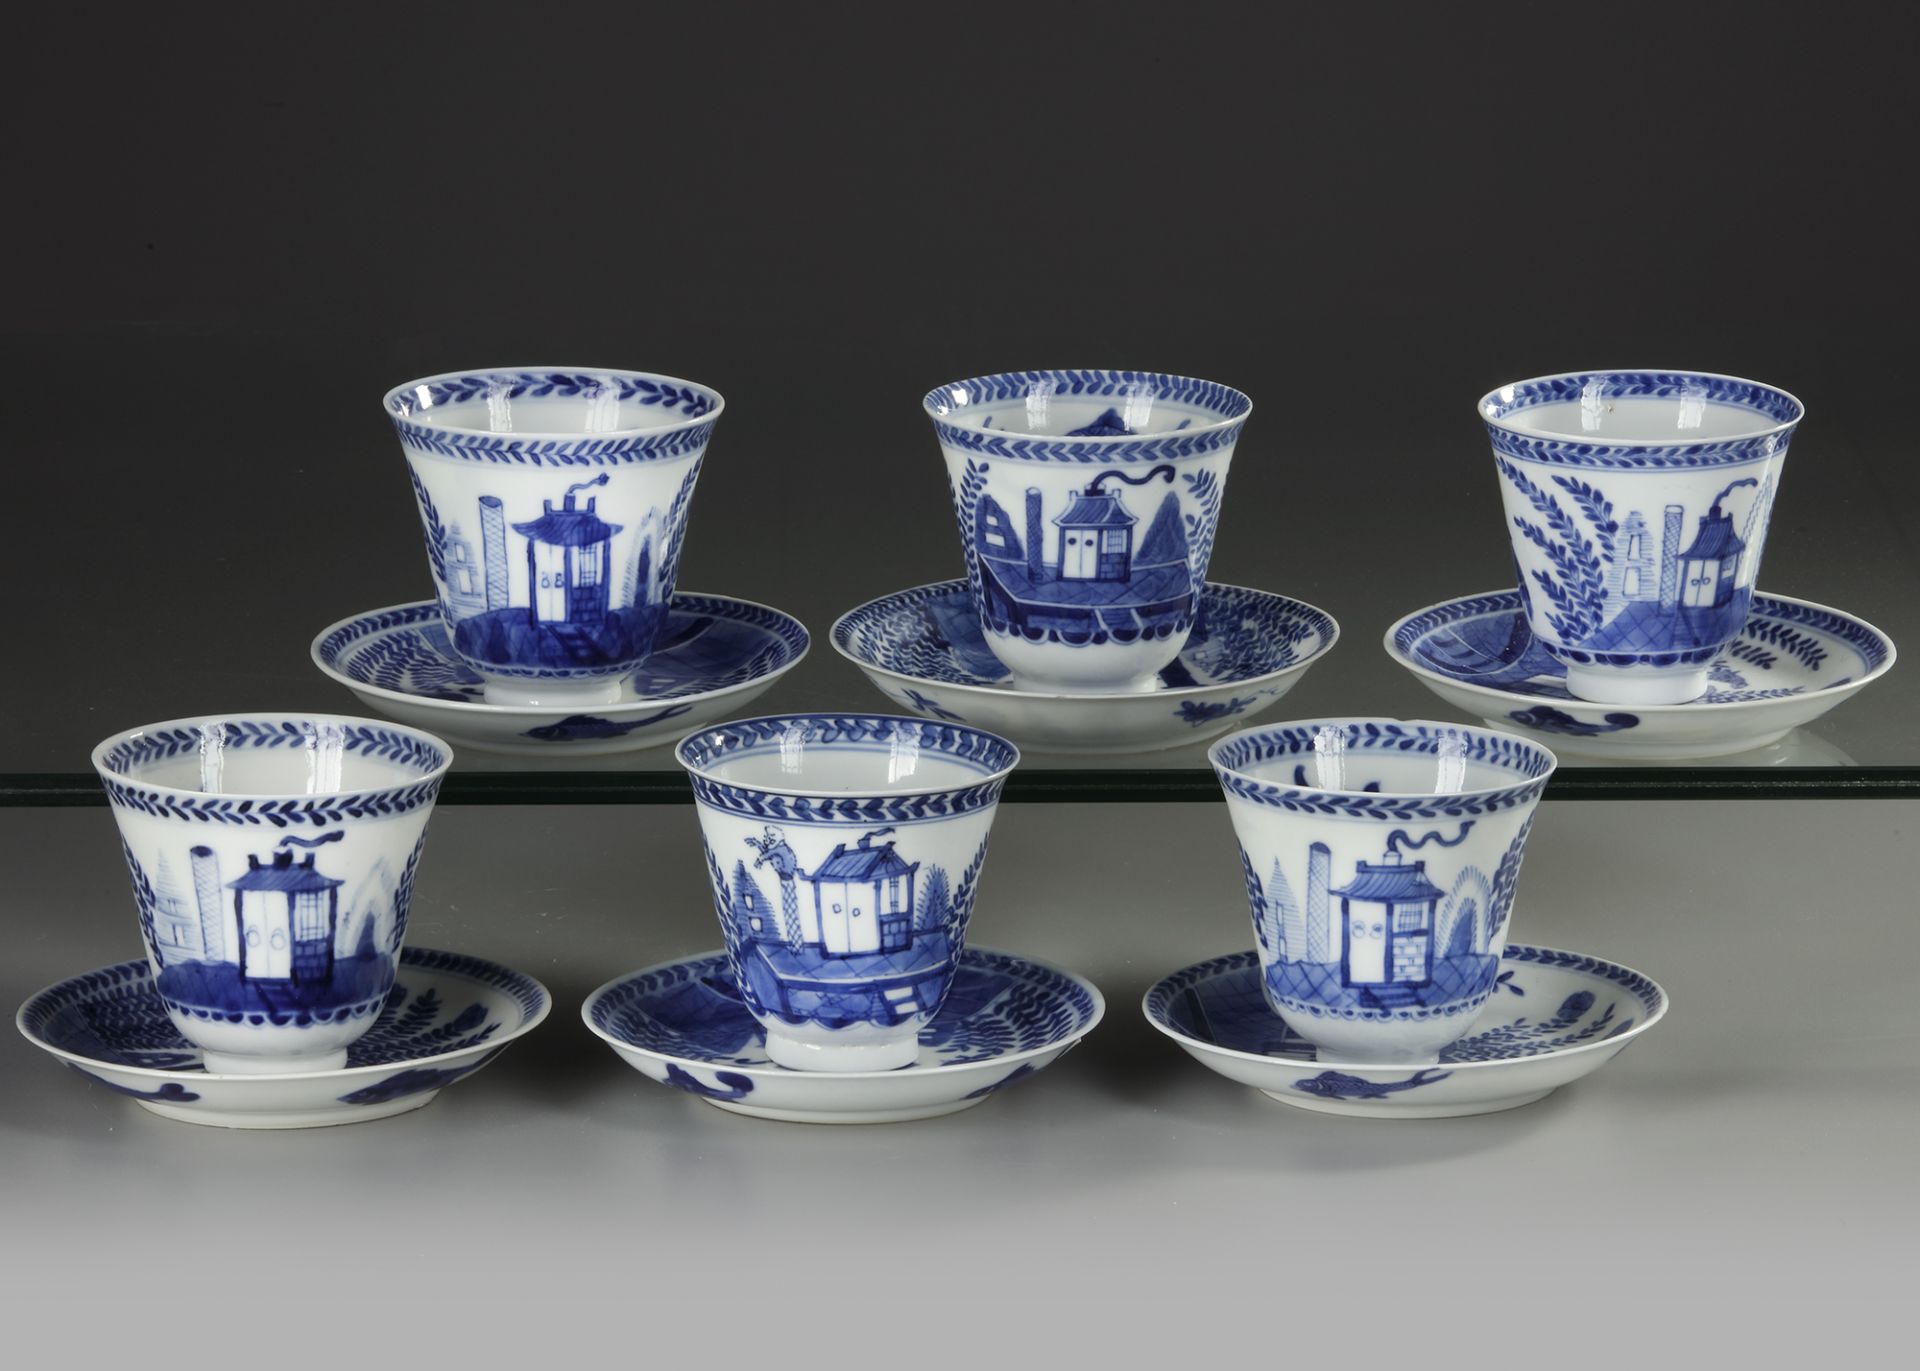 SIX CHINESE BLUE AND WHITE 'CUCKOO IN THE HOUSE' CUPS AND SAUCERS, 18TH CENTURY